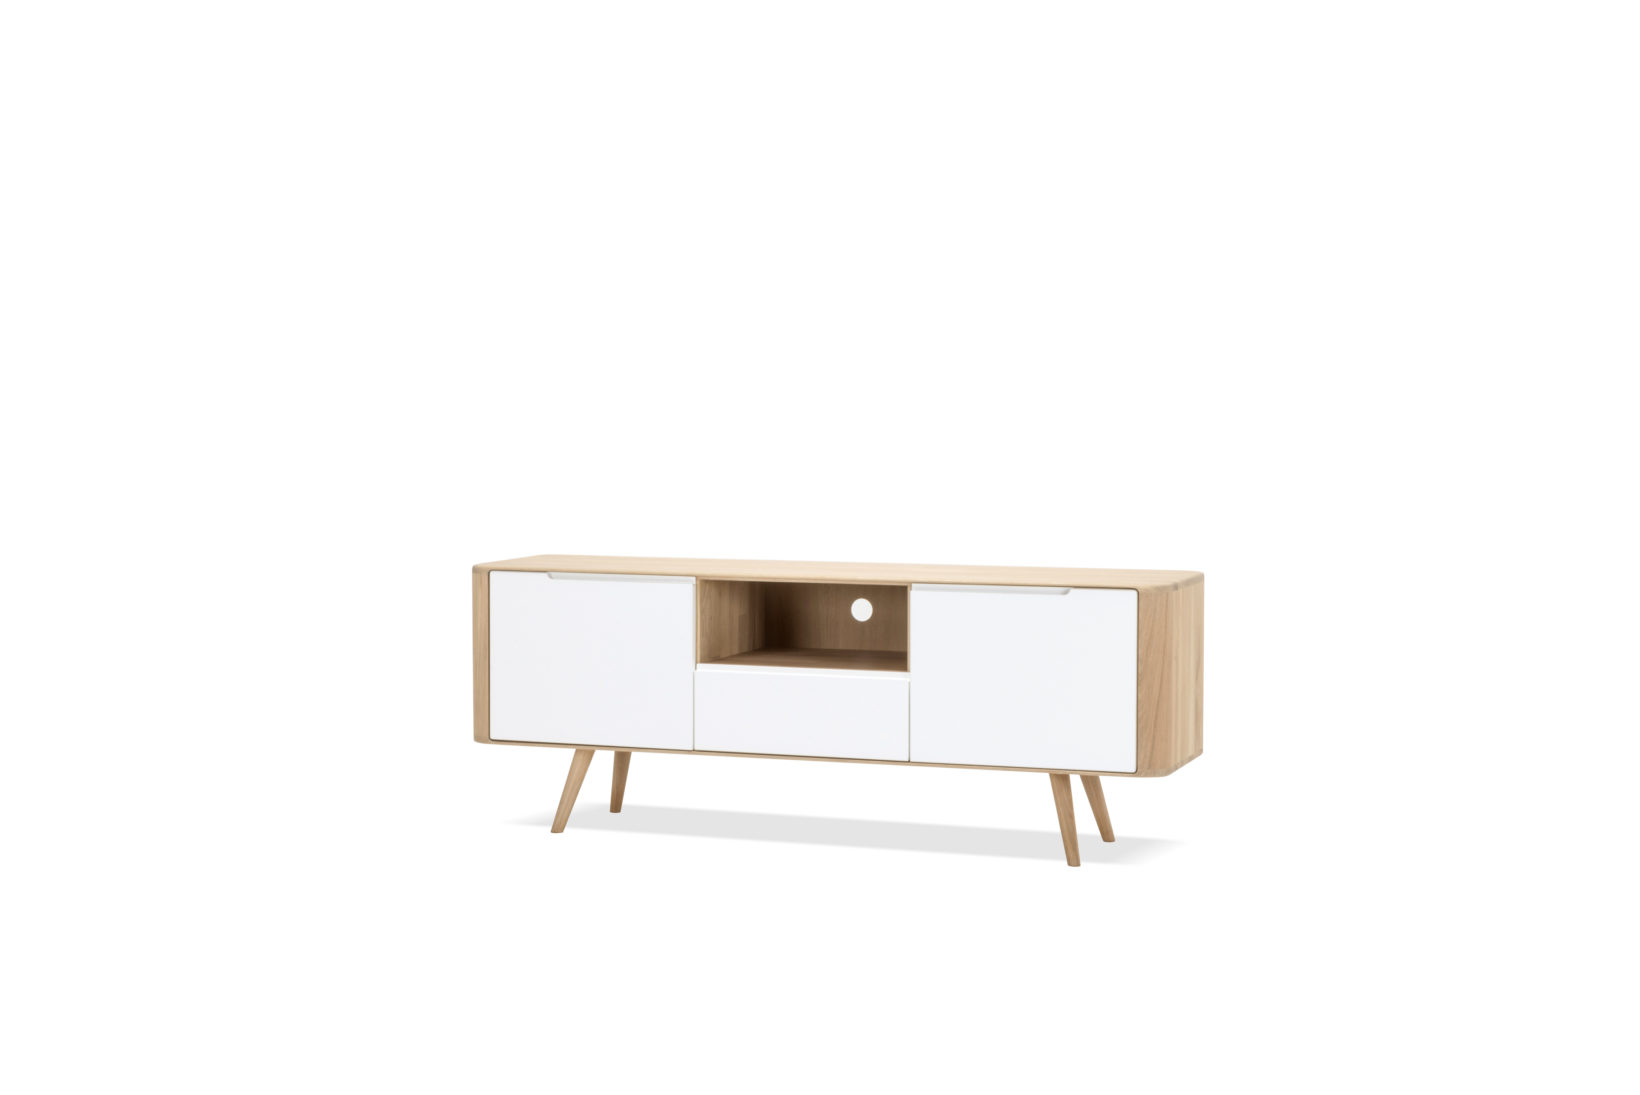 Gazzda Ena TV Sideboard by Olson and Baker - Designer & Contemporary Sofas, Furniture - Olson and Baker showcases original designs from authentic, designer brands. Buy contemporary furniture, lighting, storage, sofas & chairs at Olson + Baker.